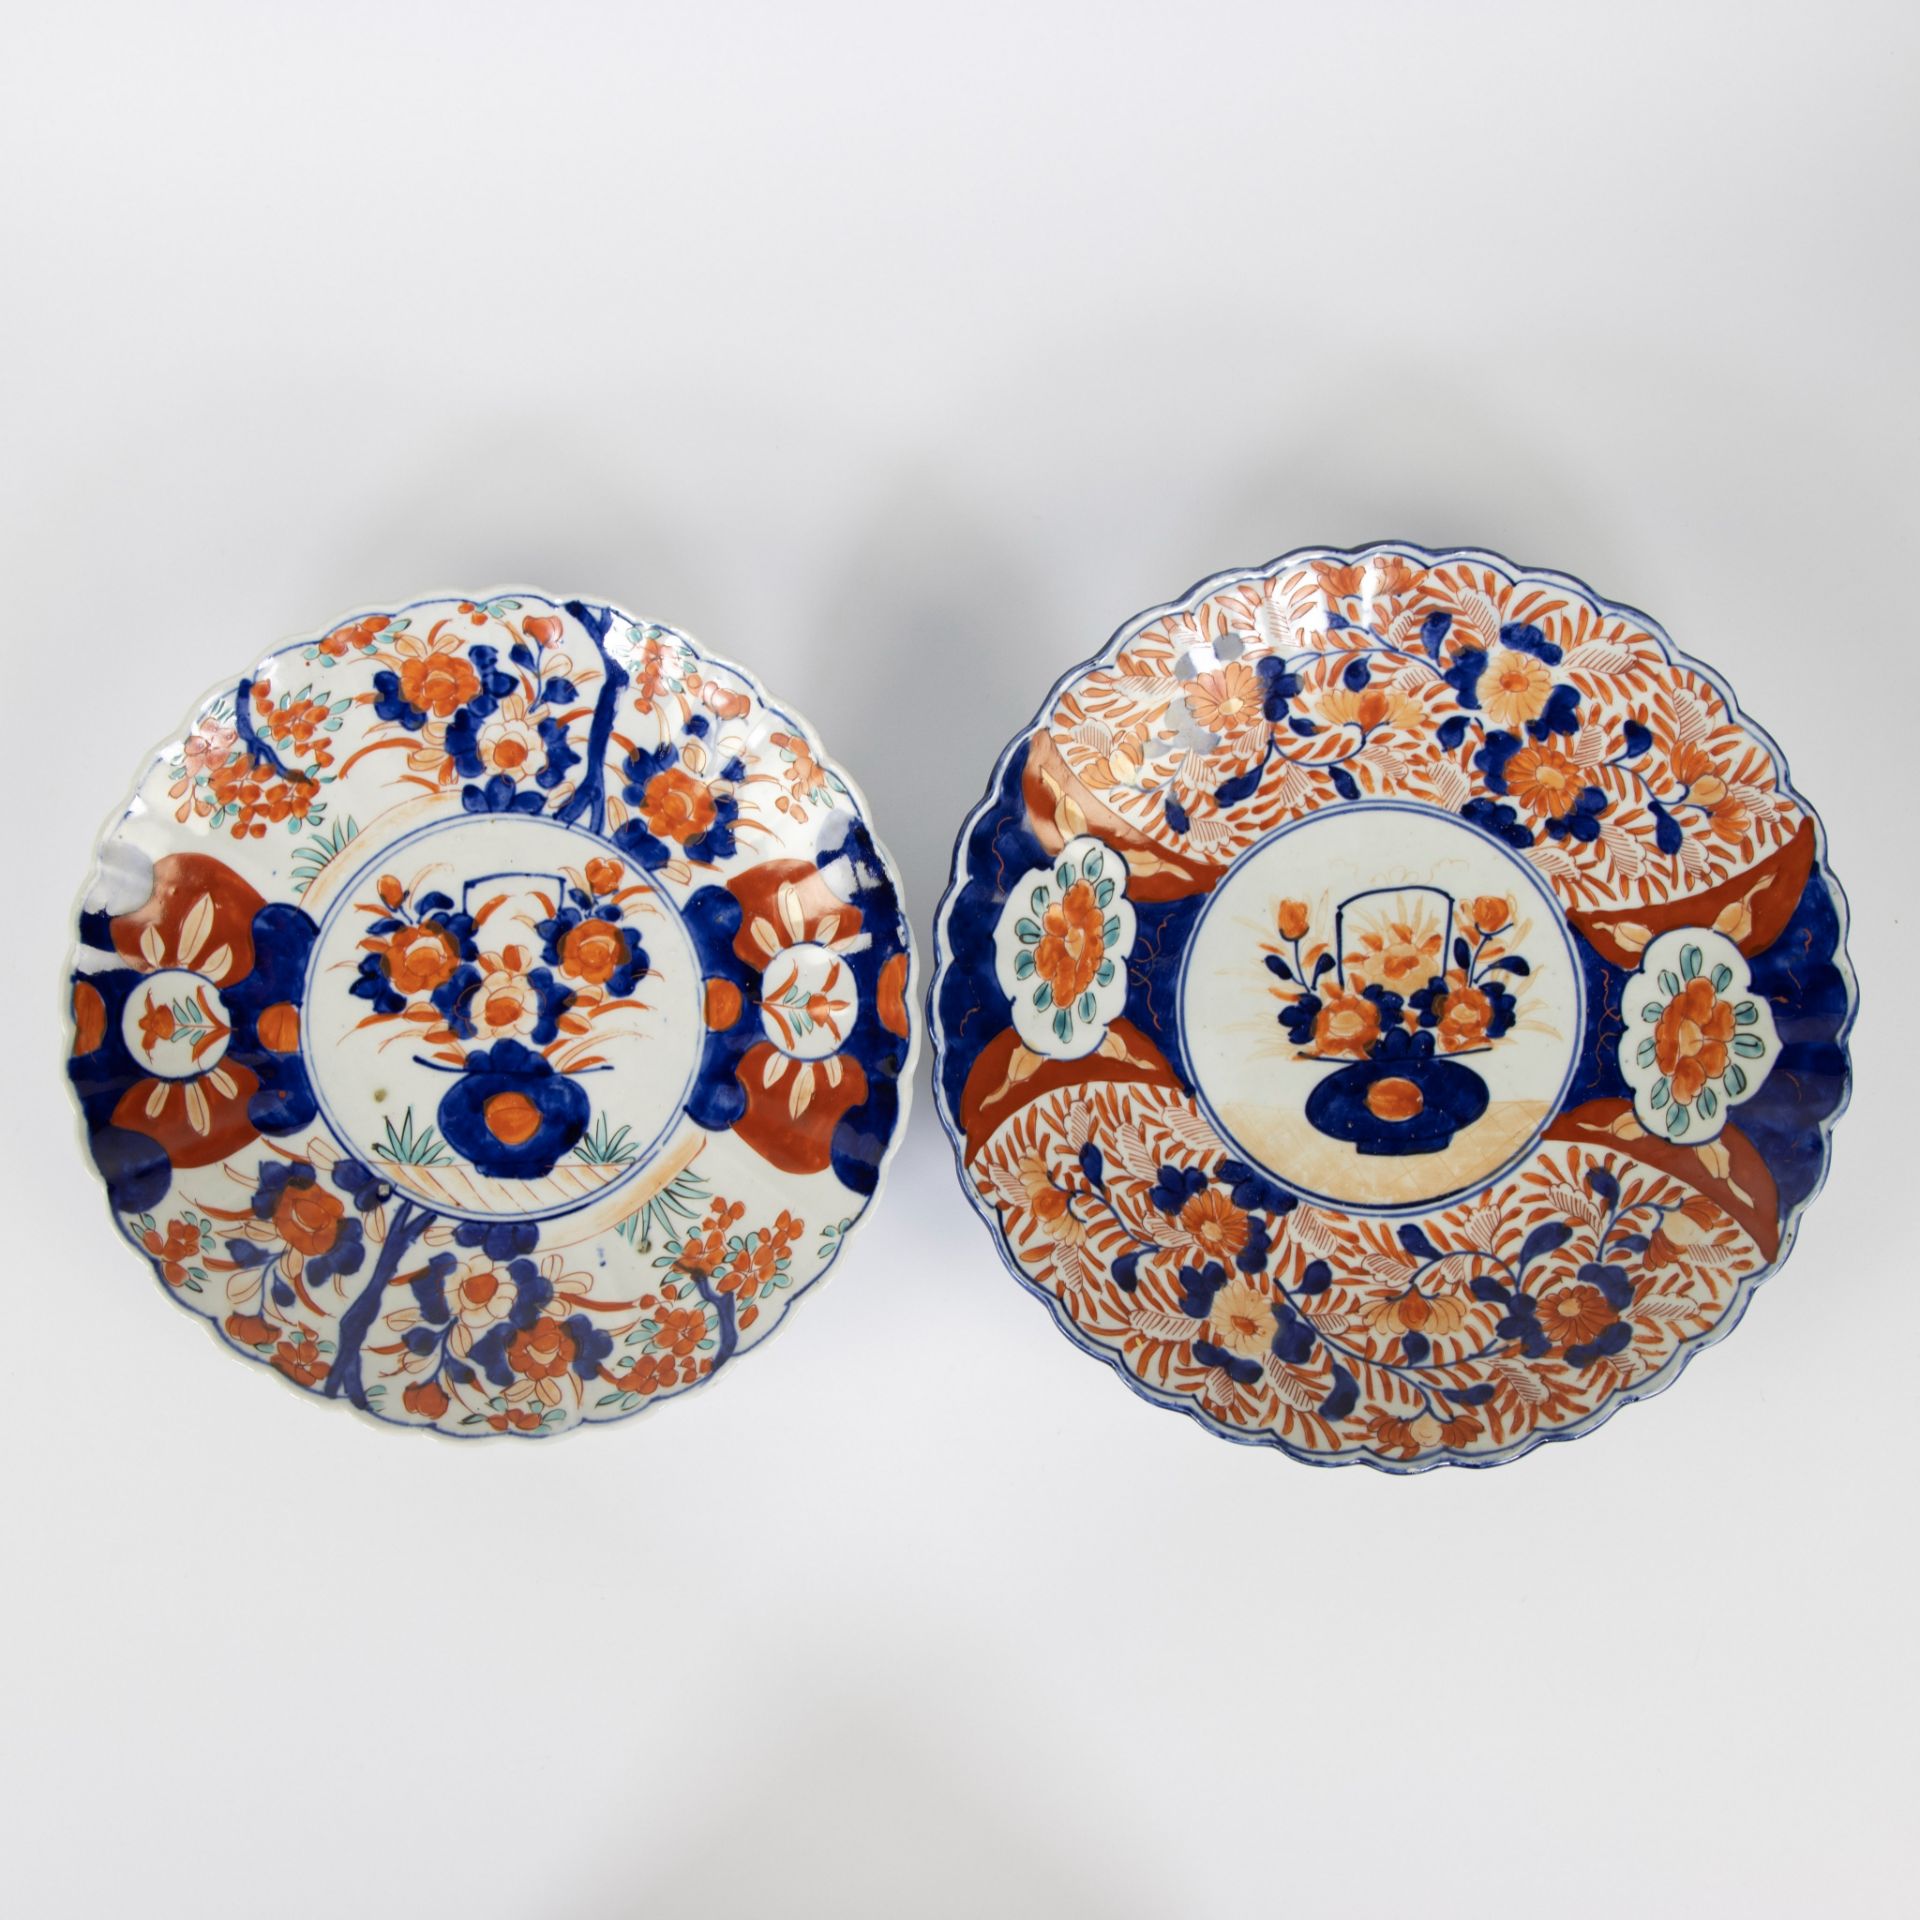 Lot of 5 Japanese Imari dishes with barbed rim, 19th century - Image 2 of 7